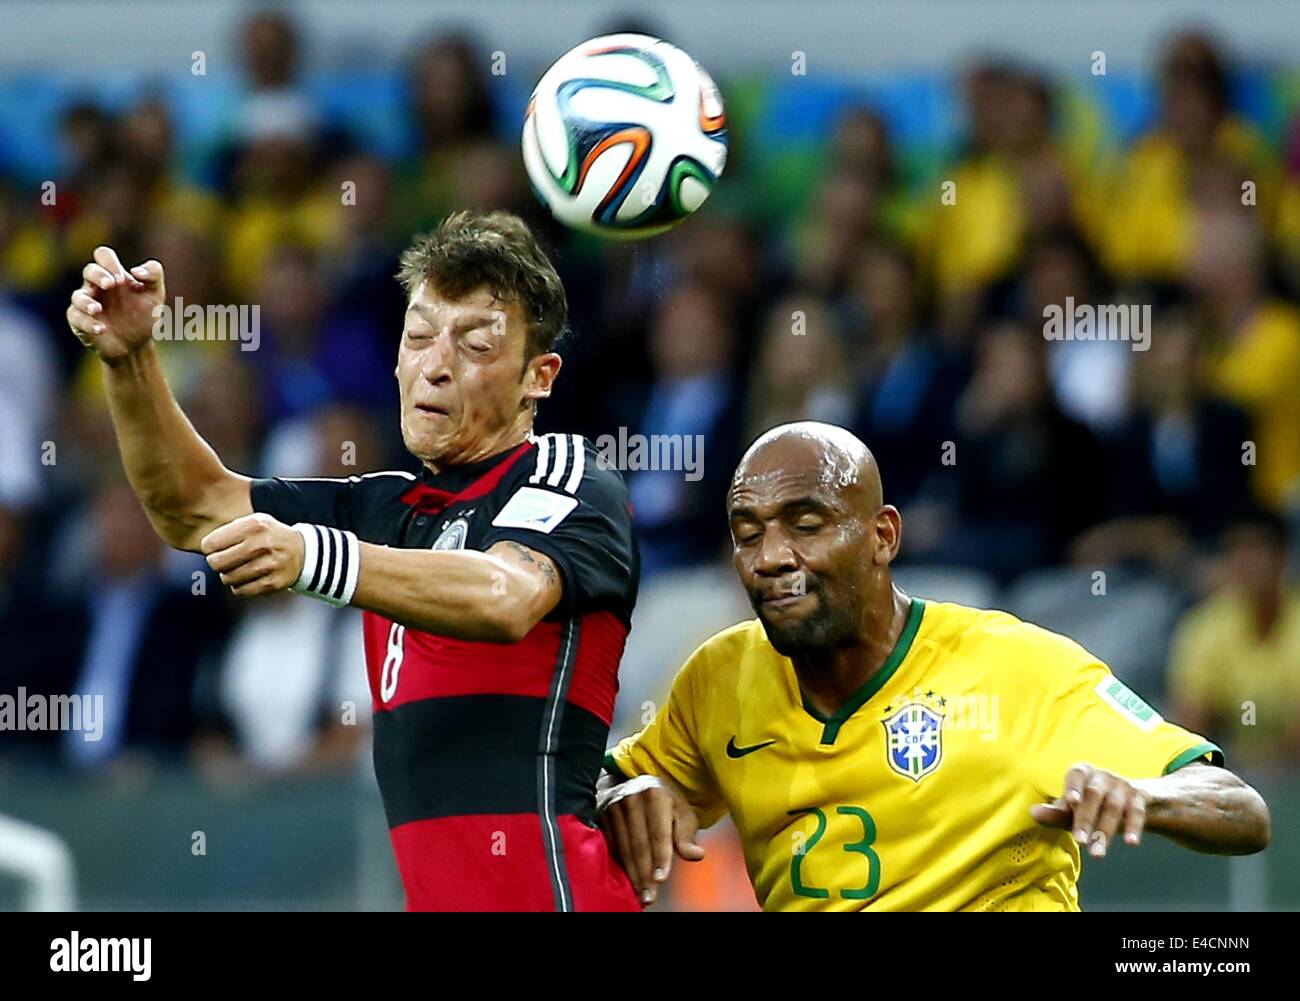 Belo Horizonte, Brazil. 8th July, 2014. Brazil's Maicon competes for a header with Germany's Mesut Ozil during a semifinal match between Brazil and Germany of 2014 FIFA World Cup at the Estadio Mineirao Stadium in Belo Horizonte, Brazil, on July 8, 2014. Credit:  Chen Jianli/Xinhua/Alamy Live News Stock Photo